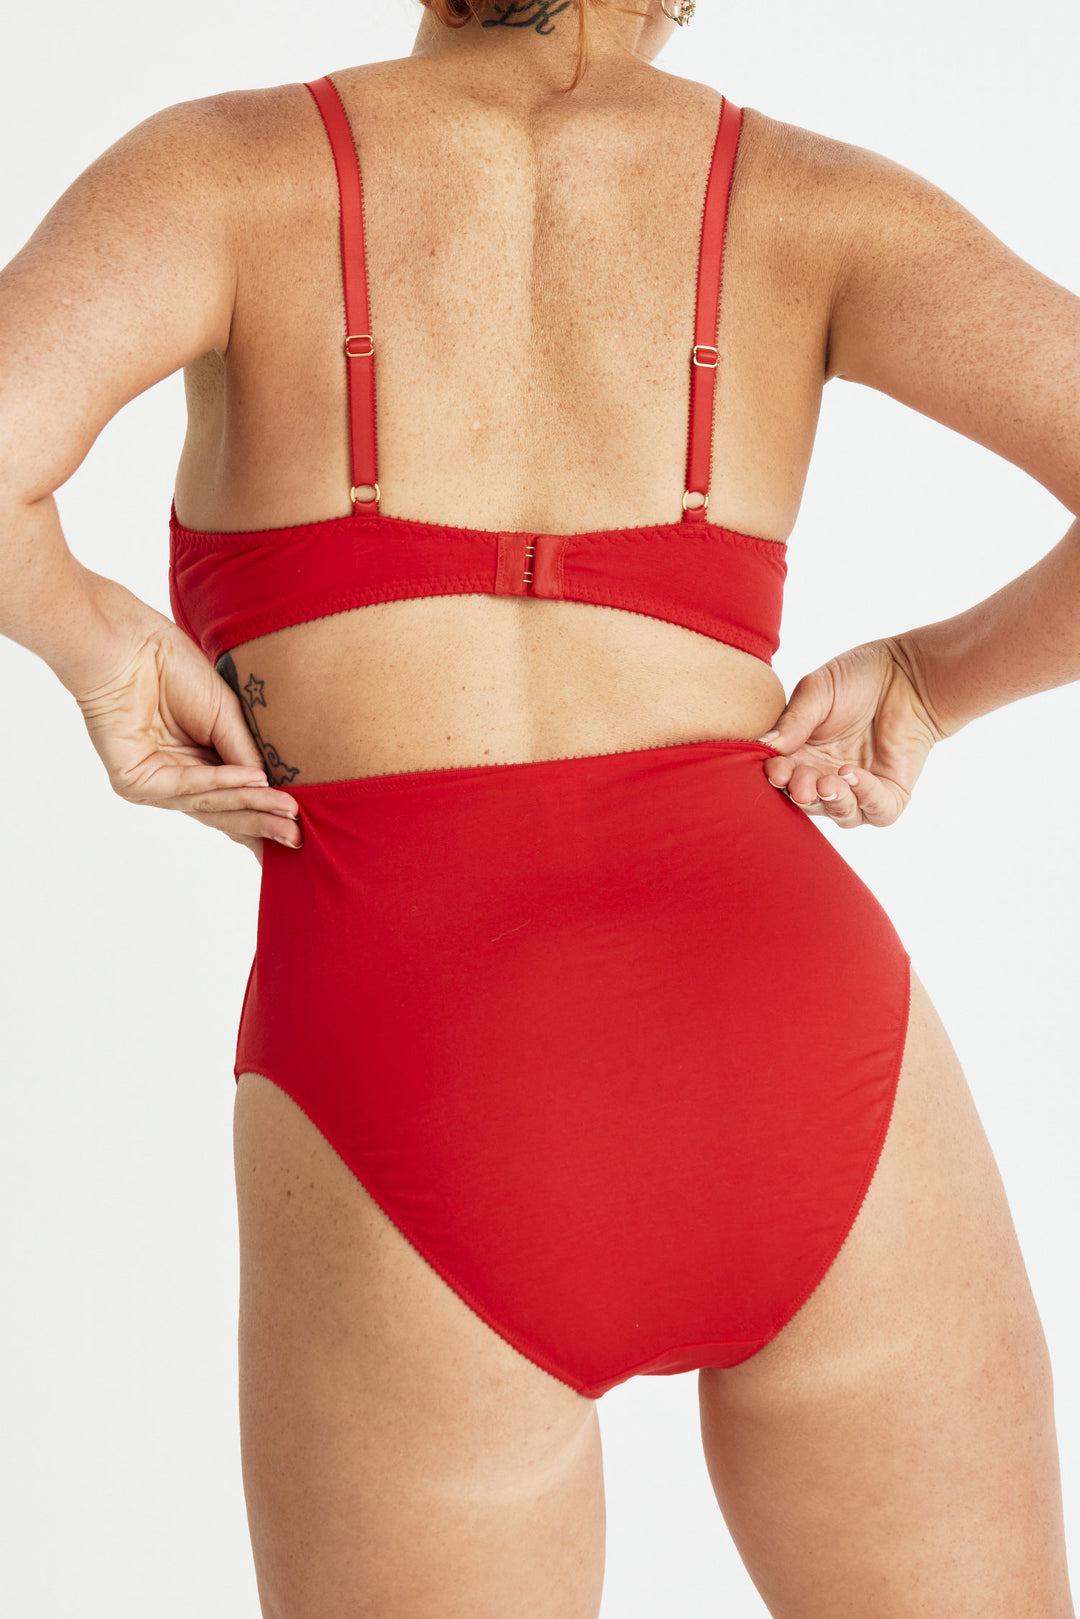 Videris Lingerie Maggie underwire free soft cup bra in red TENCEL™ features adjustable hook and eyes at the back